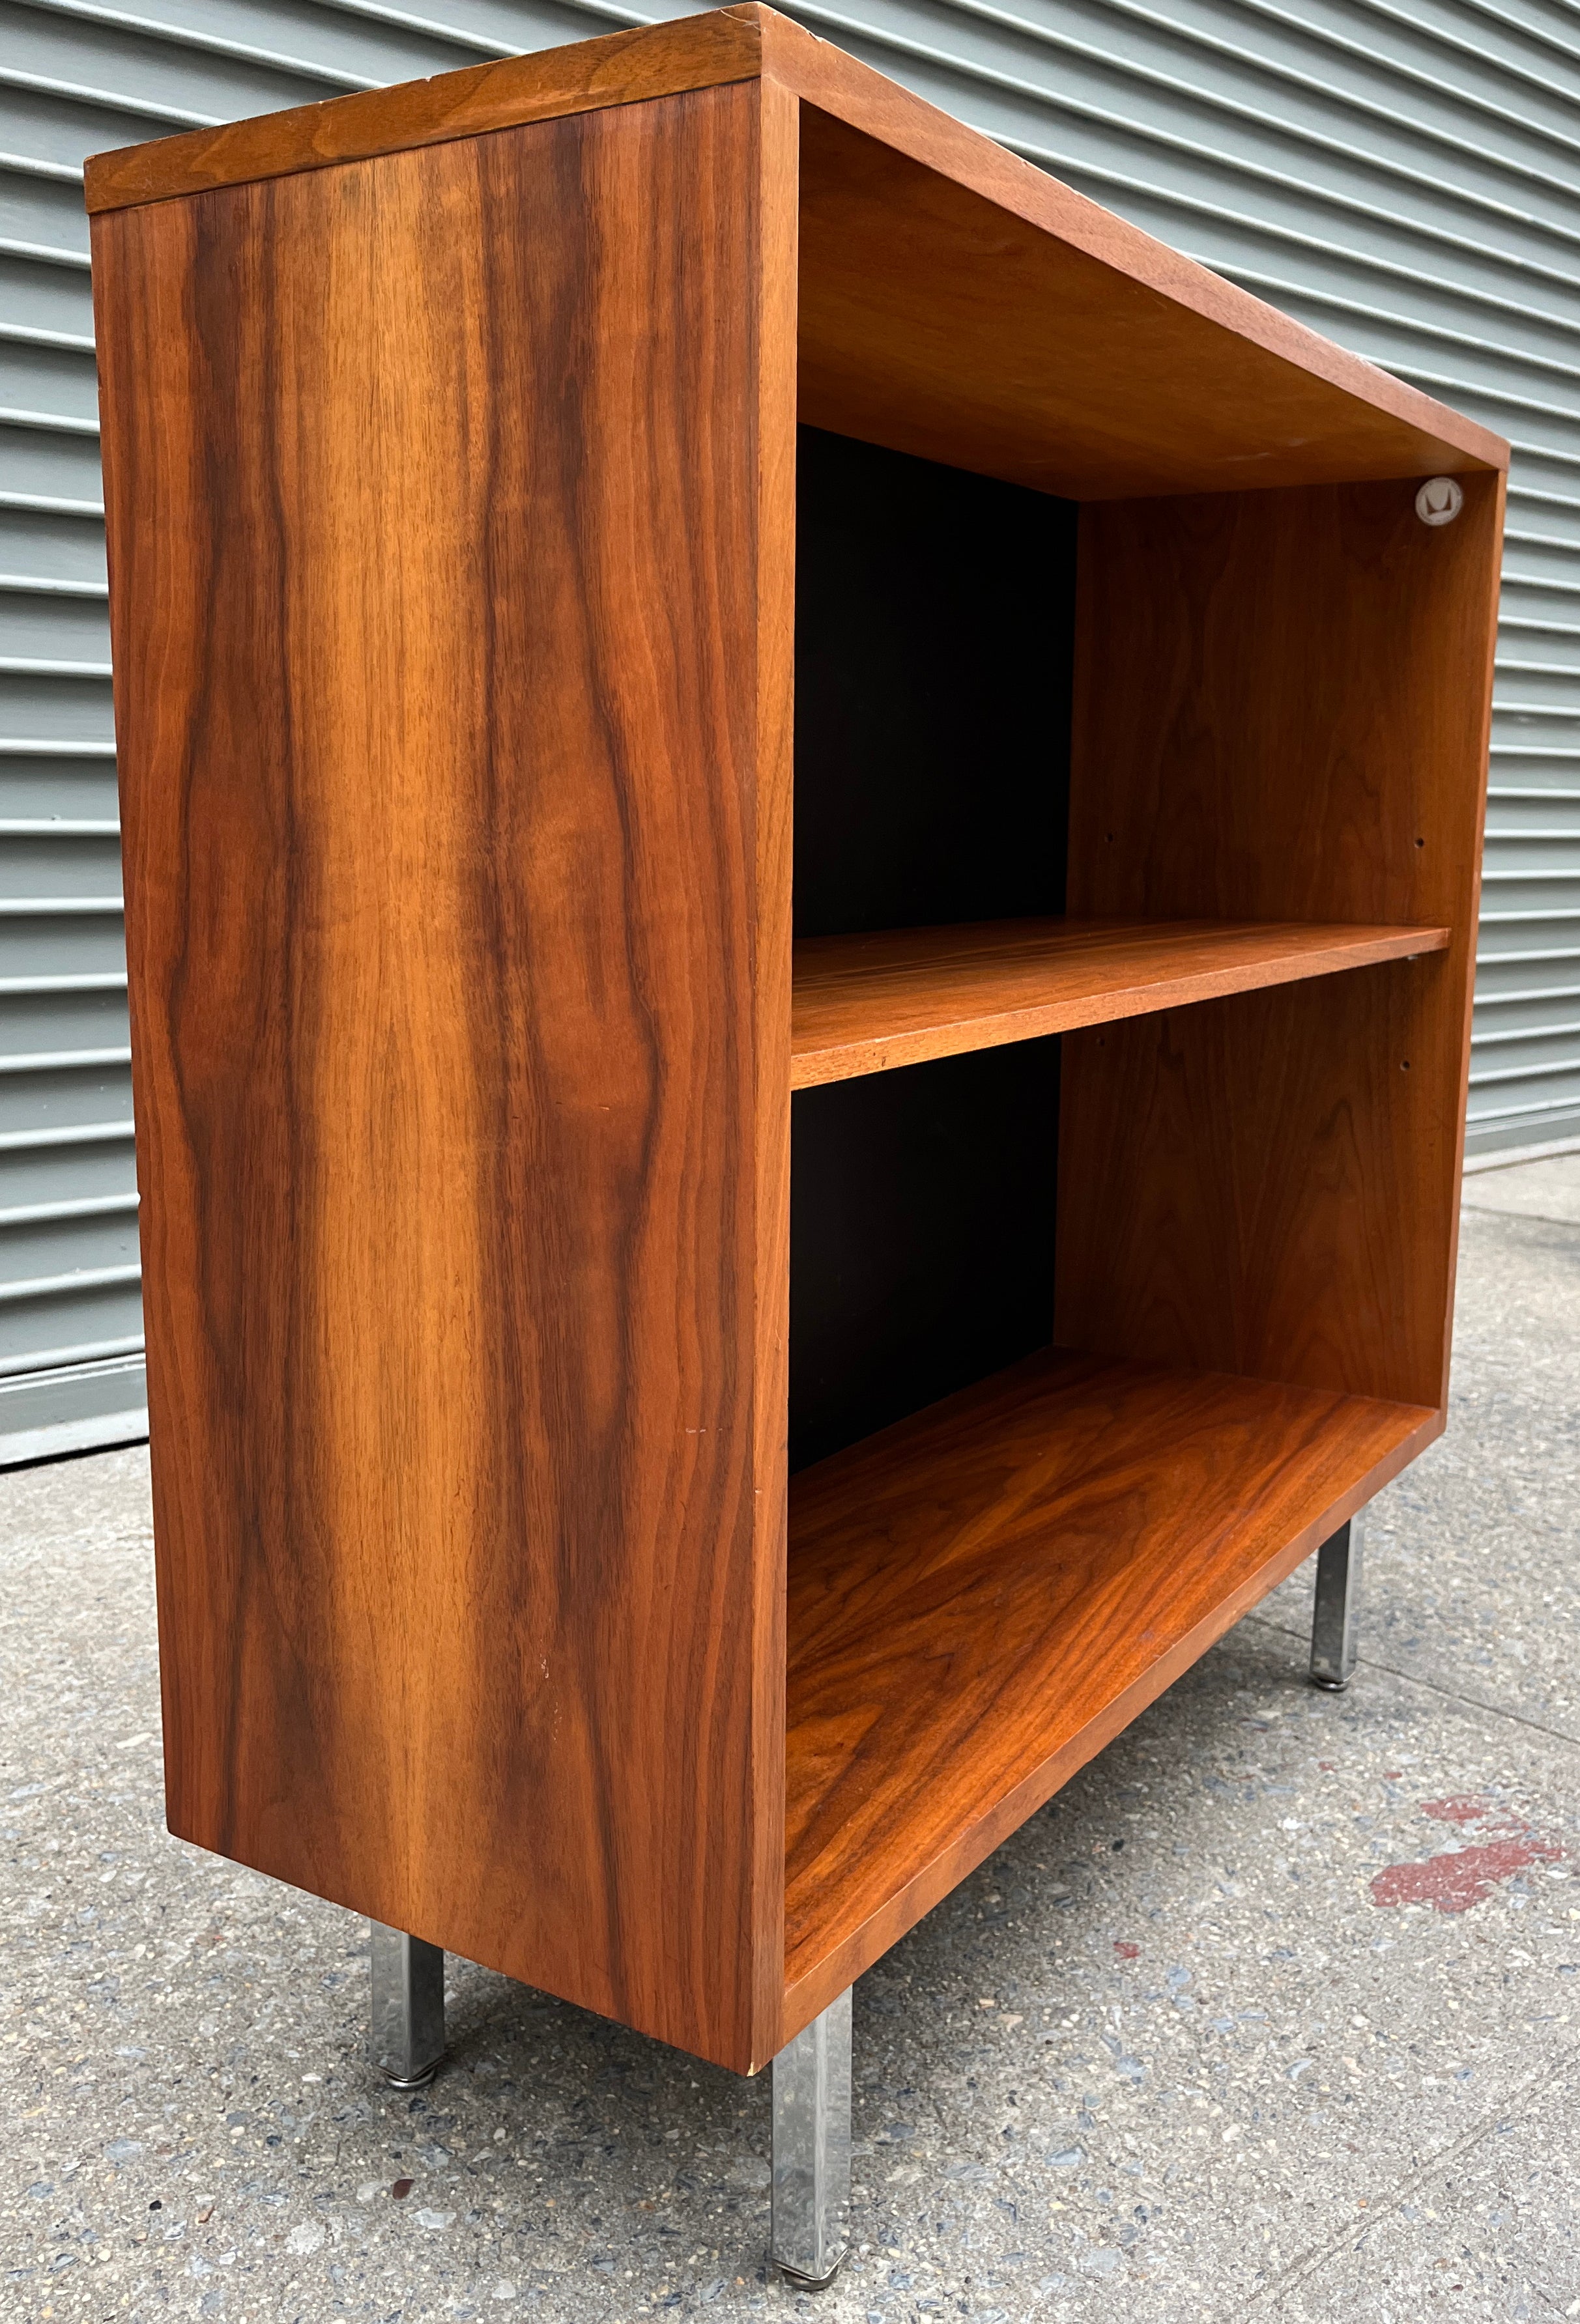 Rare smaller bookcase with great dimensions in walnut on chrome base. Designed by George Nelson for Herman Miller. We have had many Nelson case pieces and never have come across this one before. 